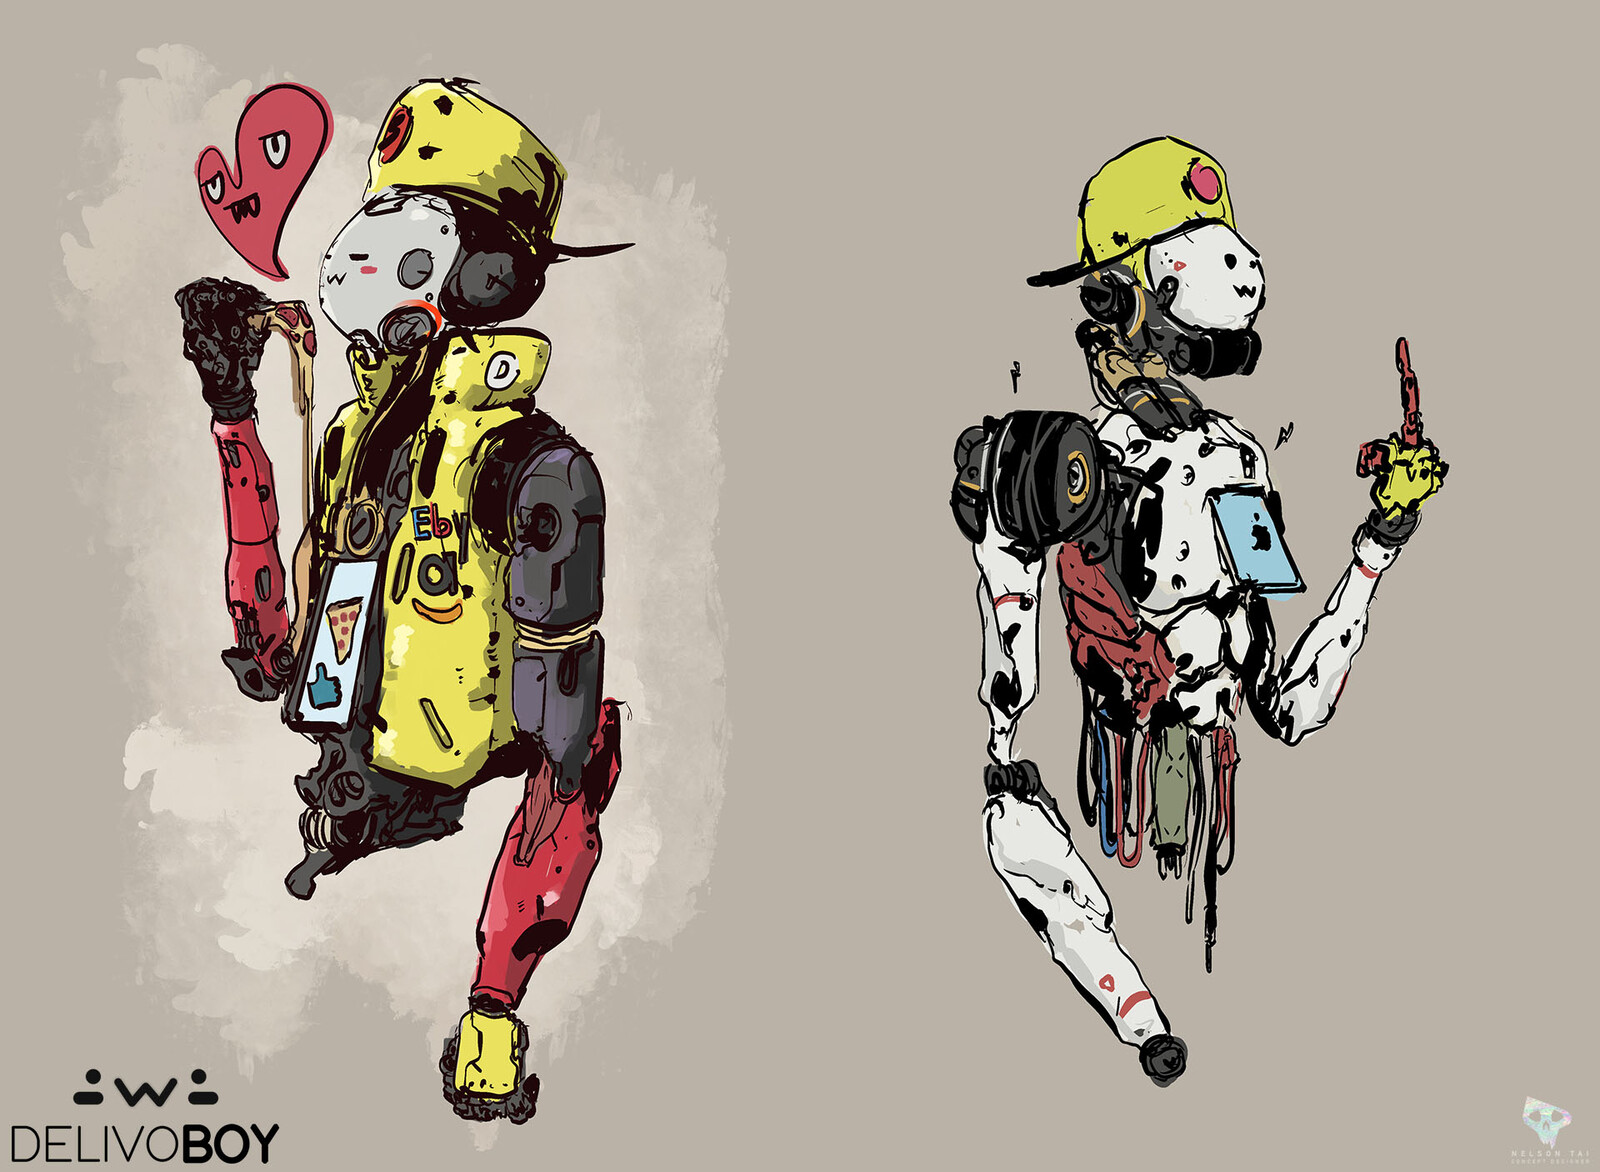 Some more fun DelivoBoy sketches for March of Robots.